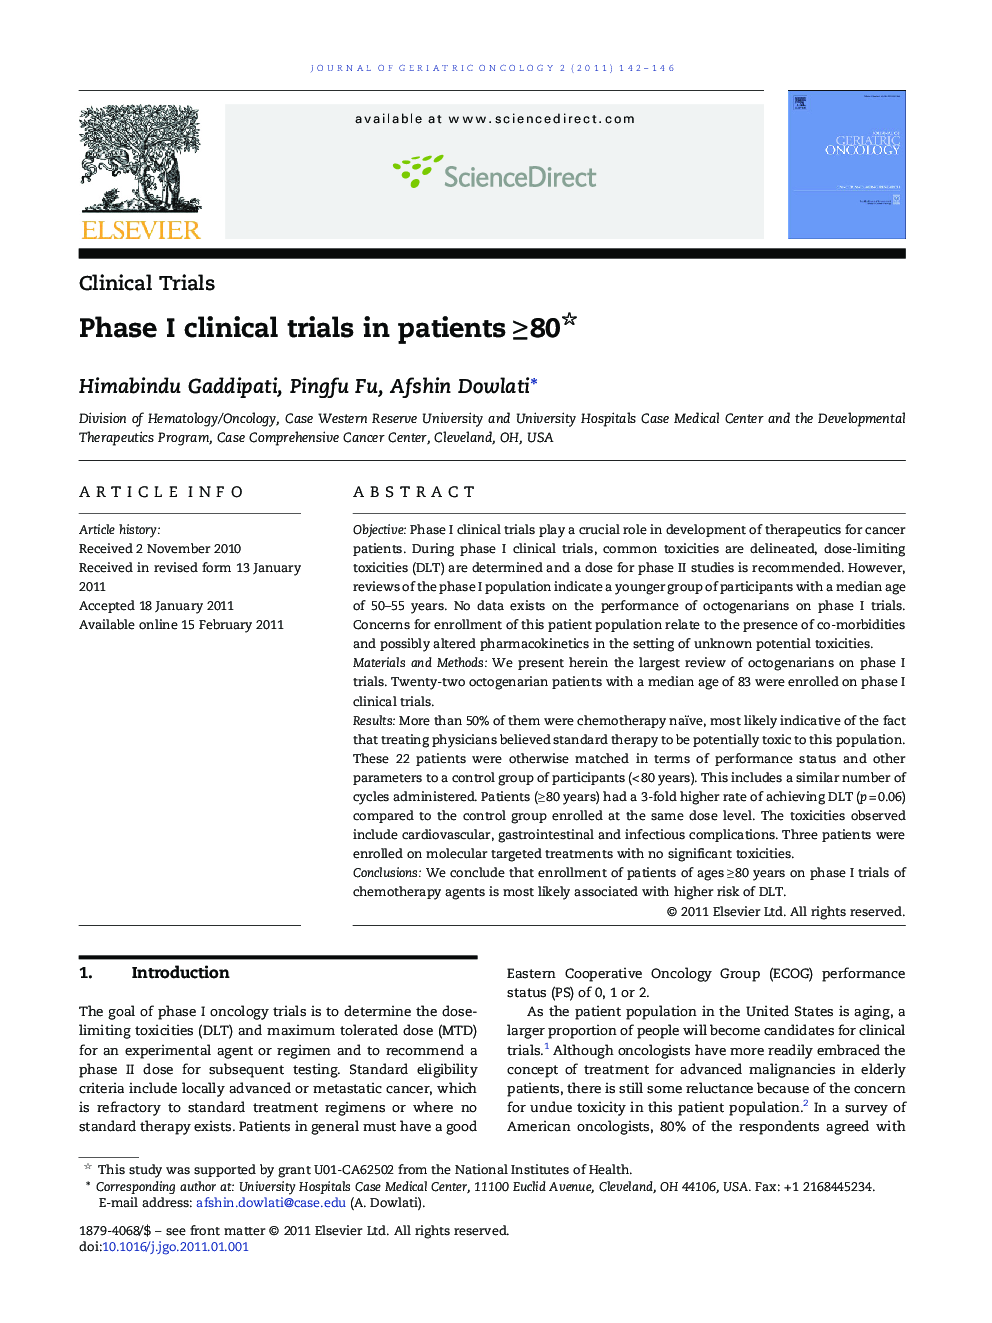 Phase I clinical trials in patientsÂ â¥Â 80